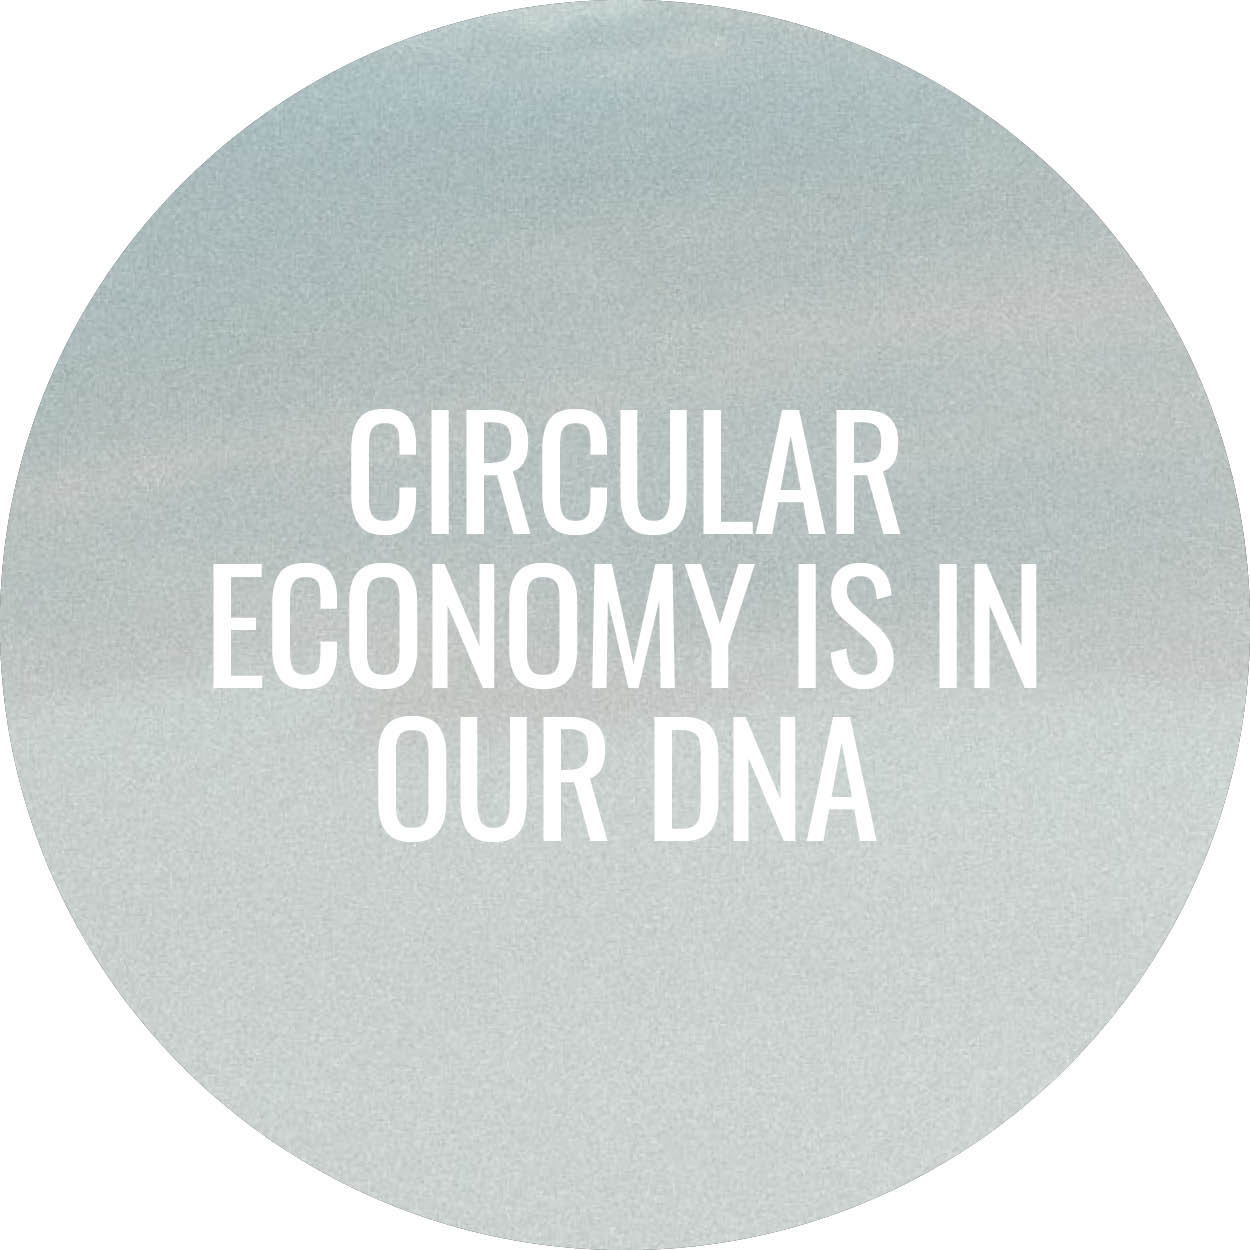 Circular economy is in our DNA